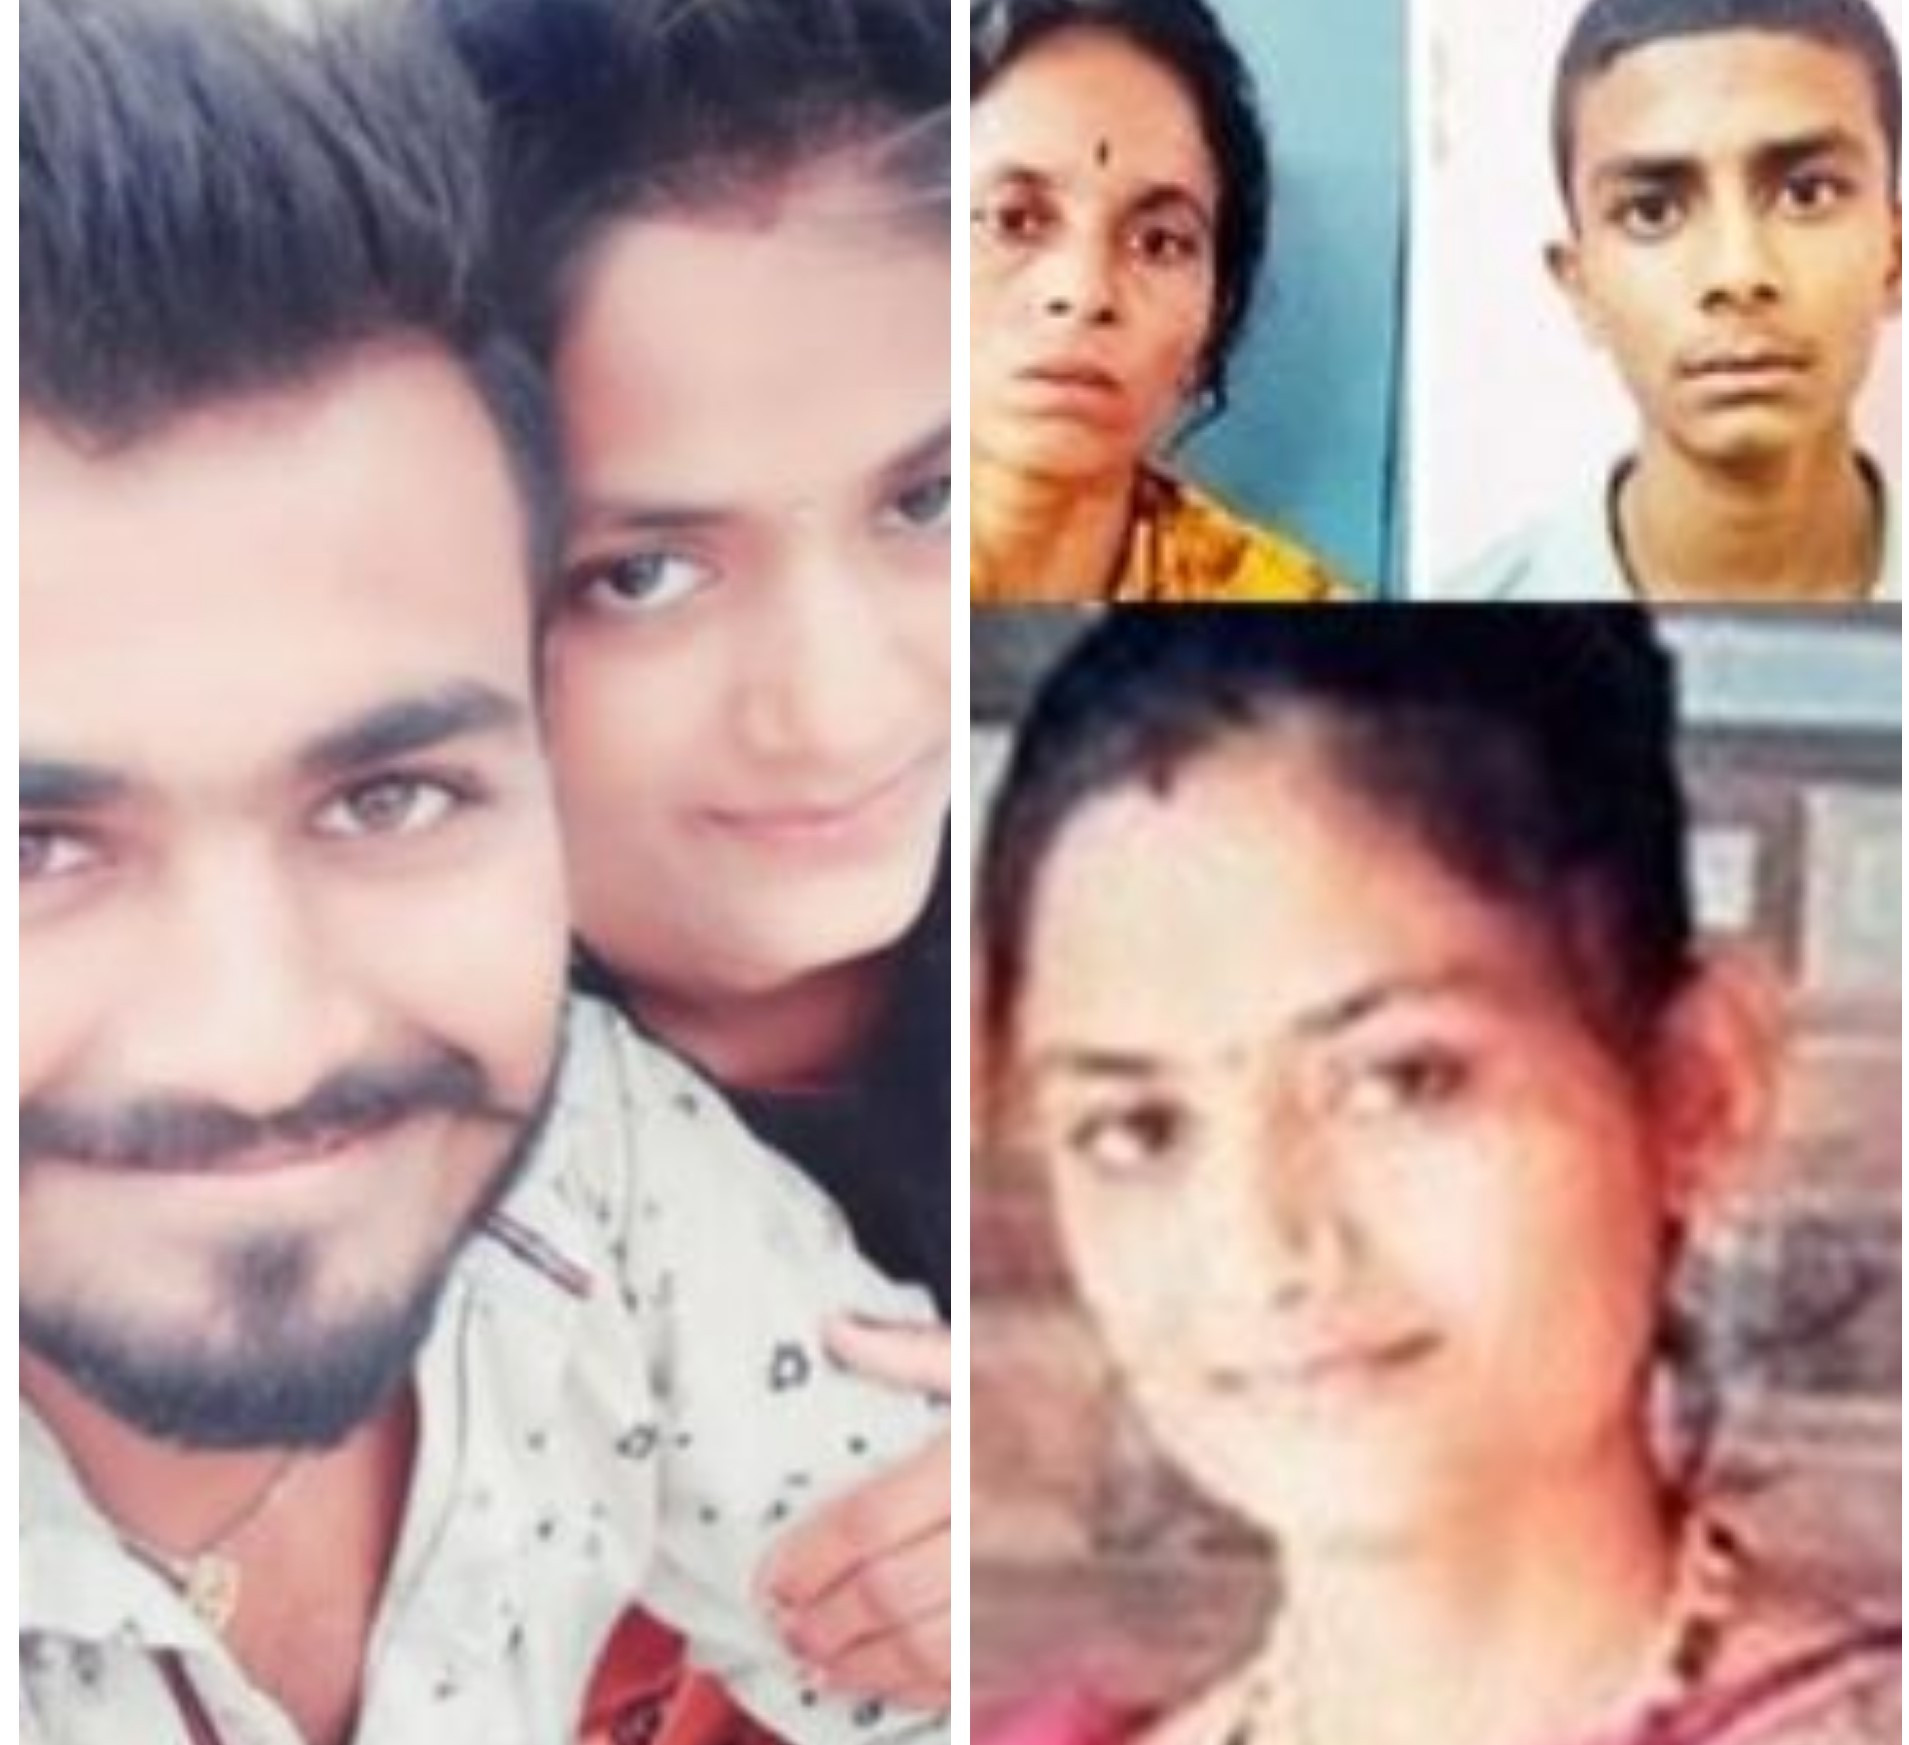 Honour Killing: Indian Teenager Behead Pregnant 19-Year-Old Sister With Mother’s Help For Marrying Without Family Consent